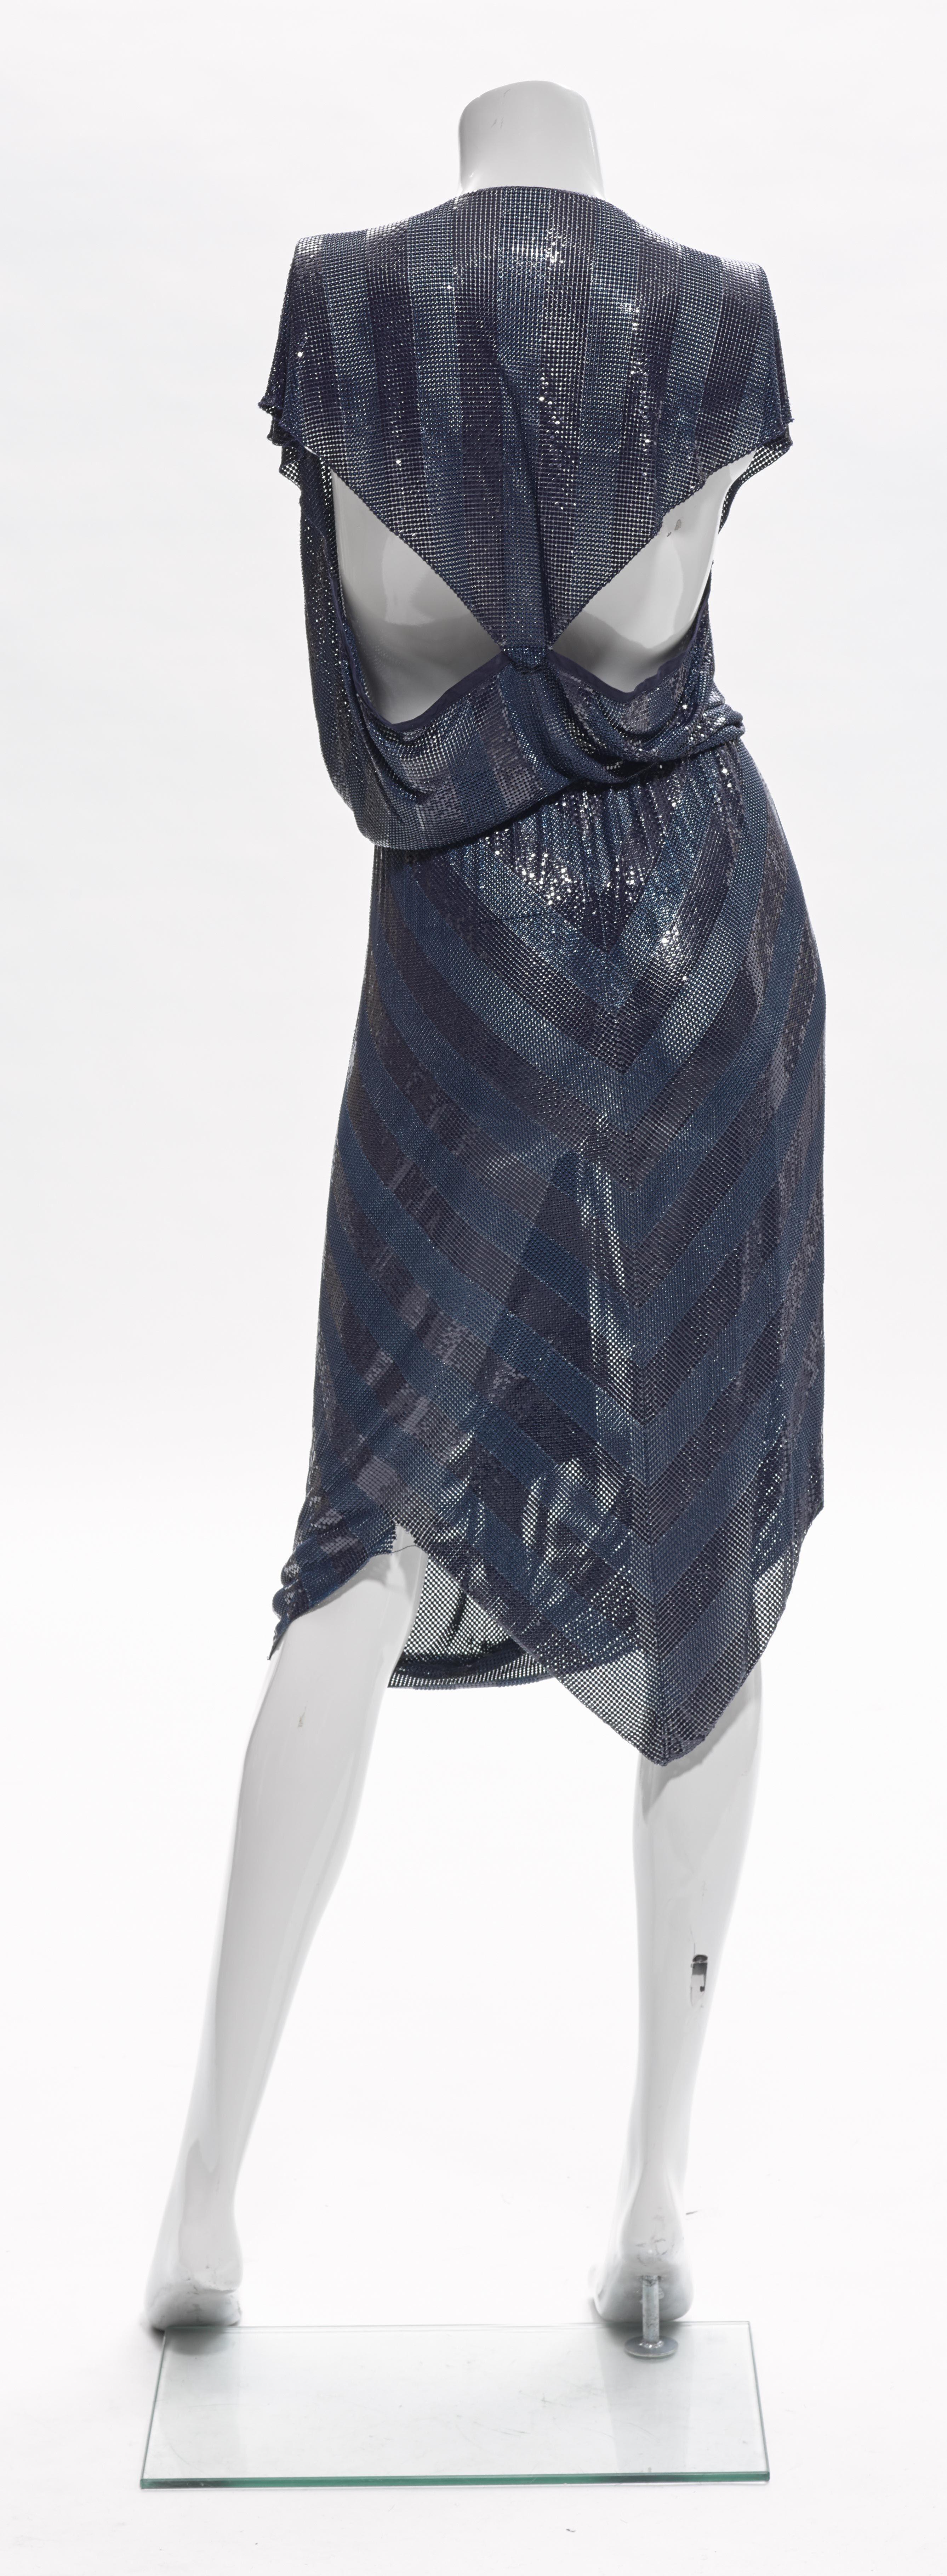 Ca. 1983 Gianni Versace striped navy Oroton metal mesh chainmail dress featuring a deep V-neckline, cutouts at the back bodice, a gathered waistline and multiple folds at center front of the skirt. There is a 1.5